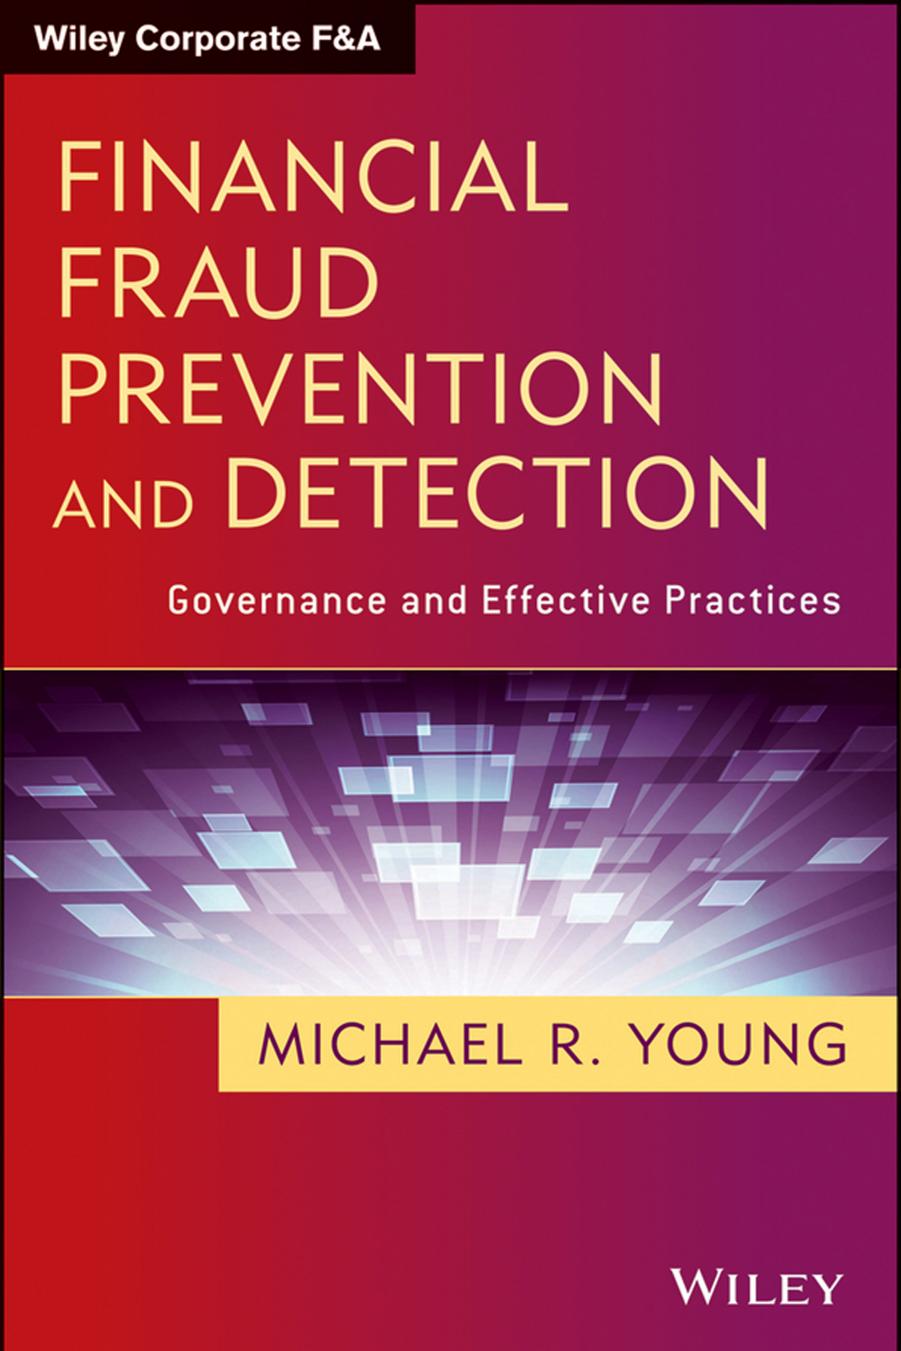 Financial Fraud Prevention and Detection: Governance and Effective Practices